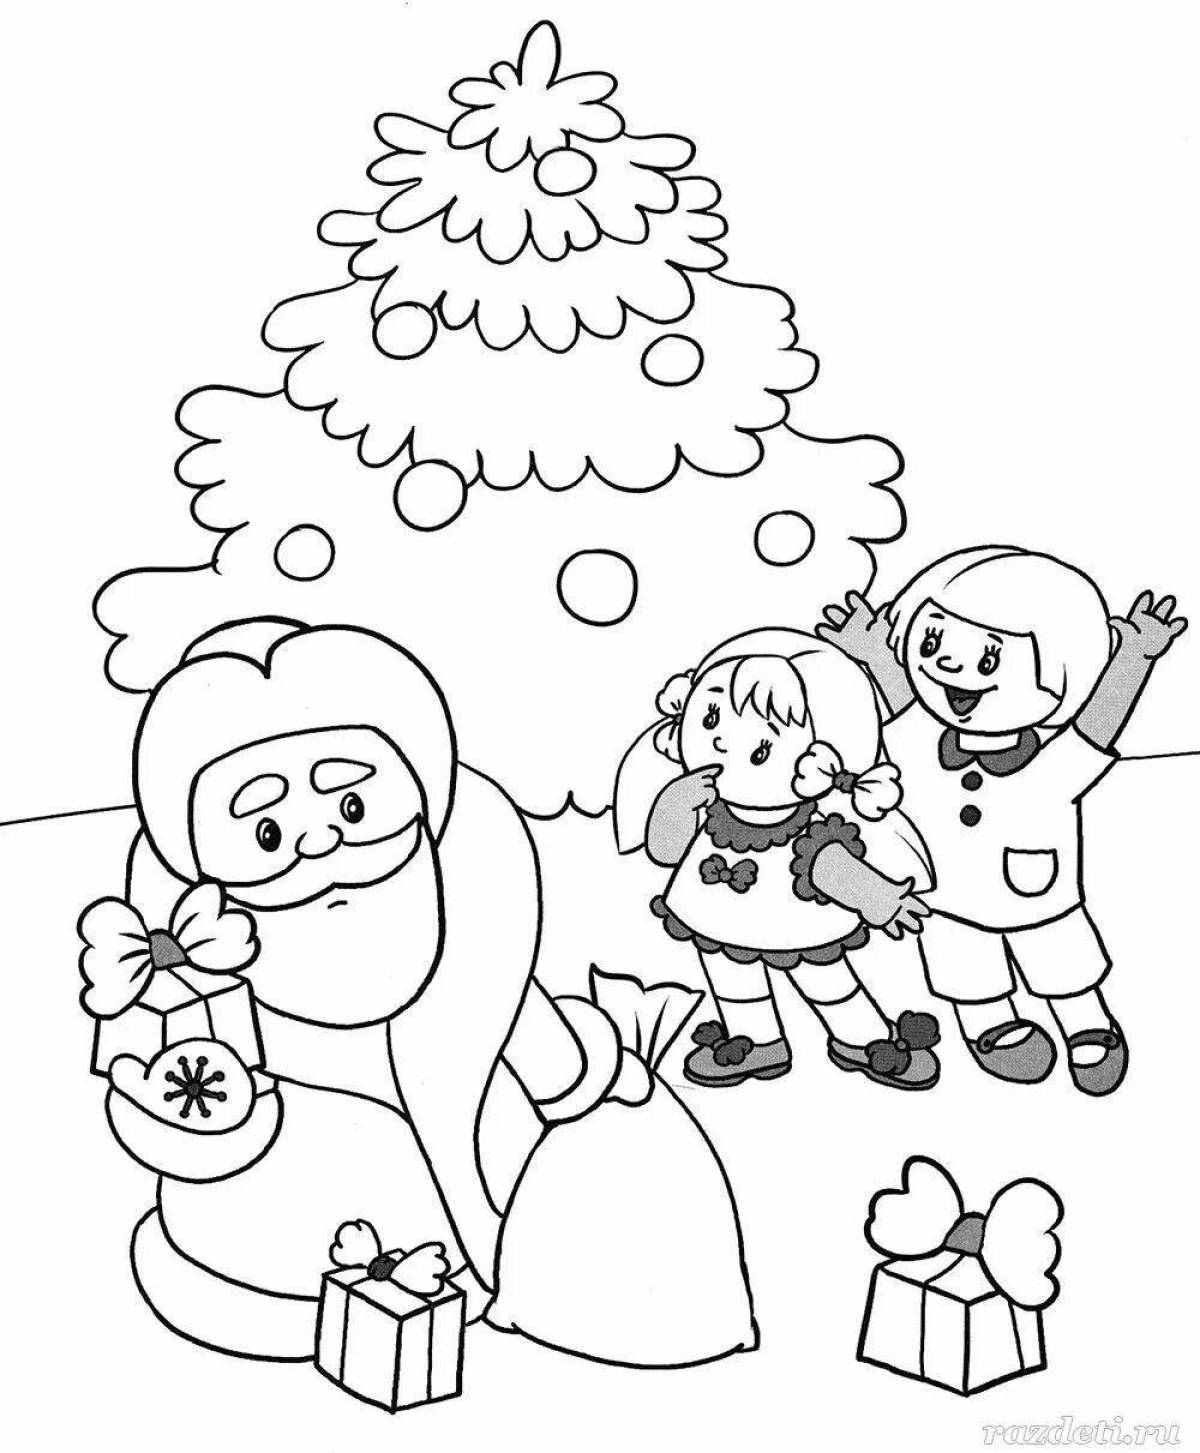 Delightful winter coloring book for kids 4 5